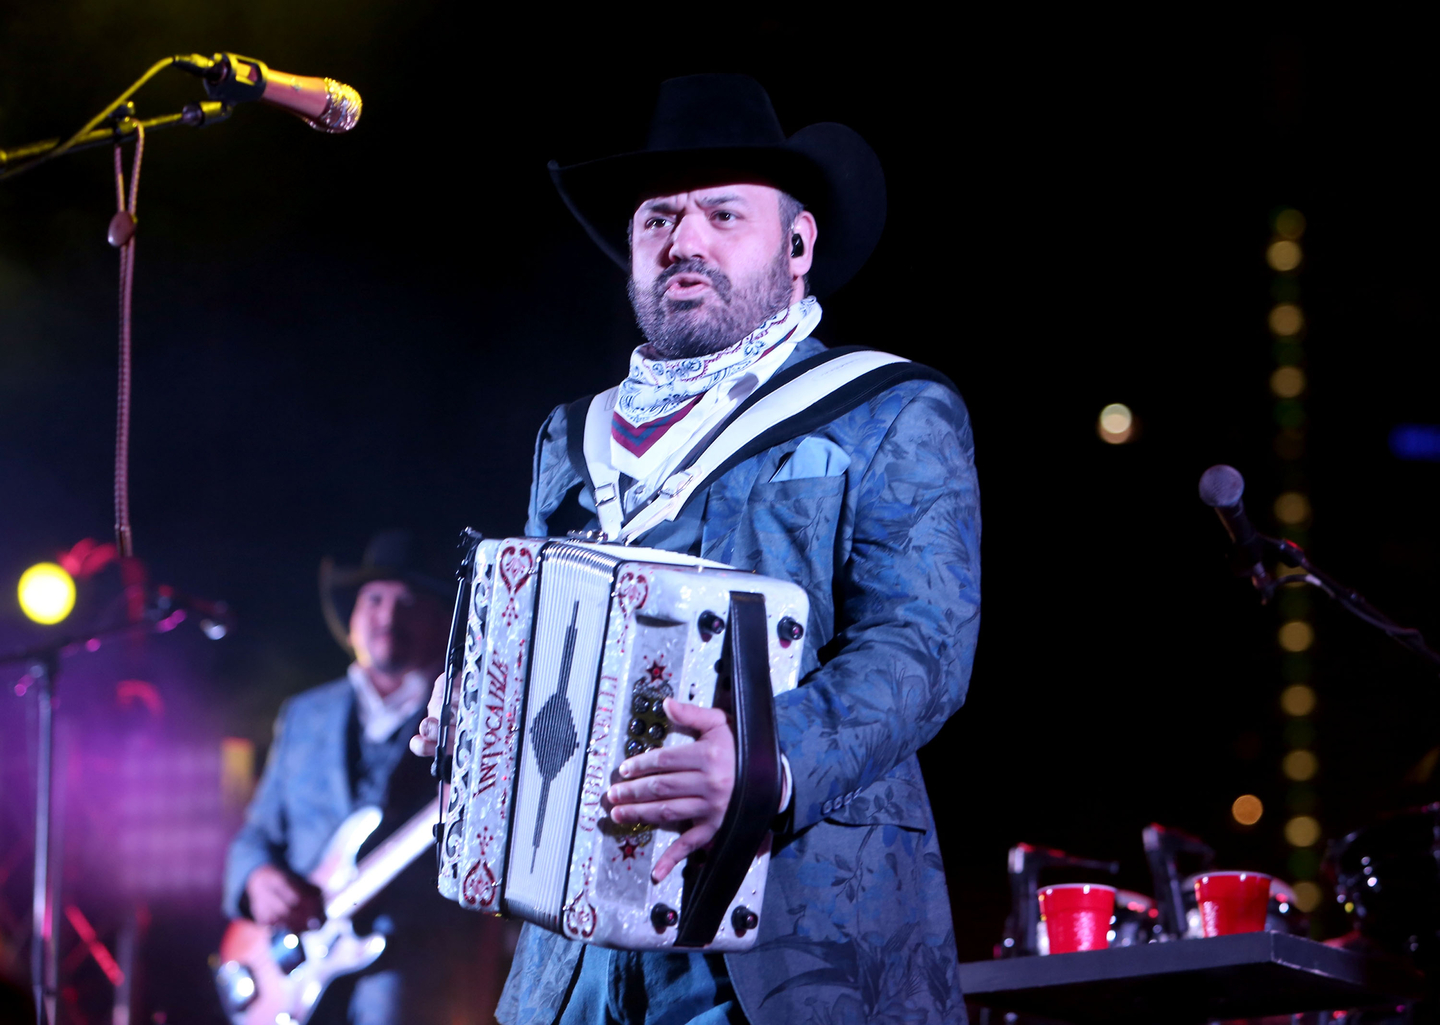 Intocable, 2016. Photo by Waytao Shing/Getty Images for SXSW